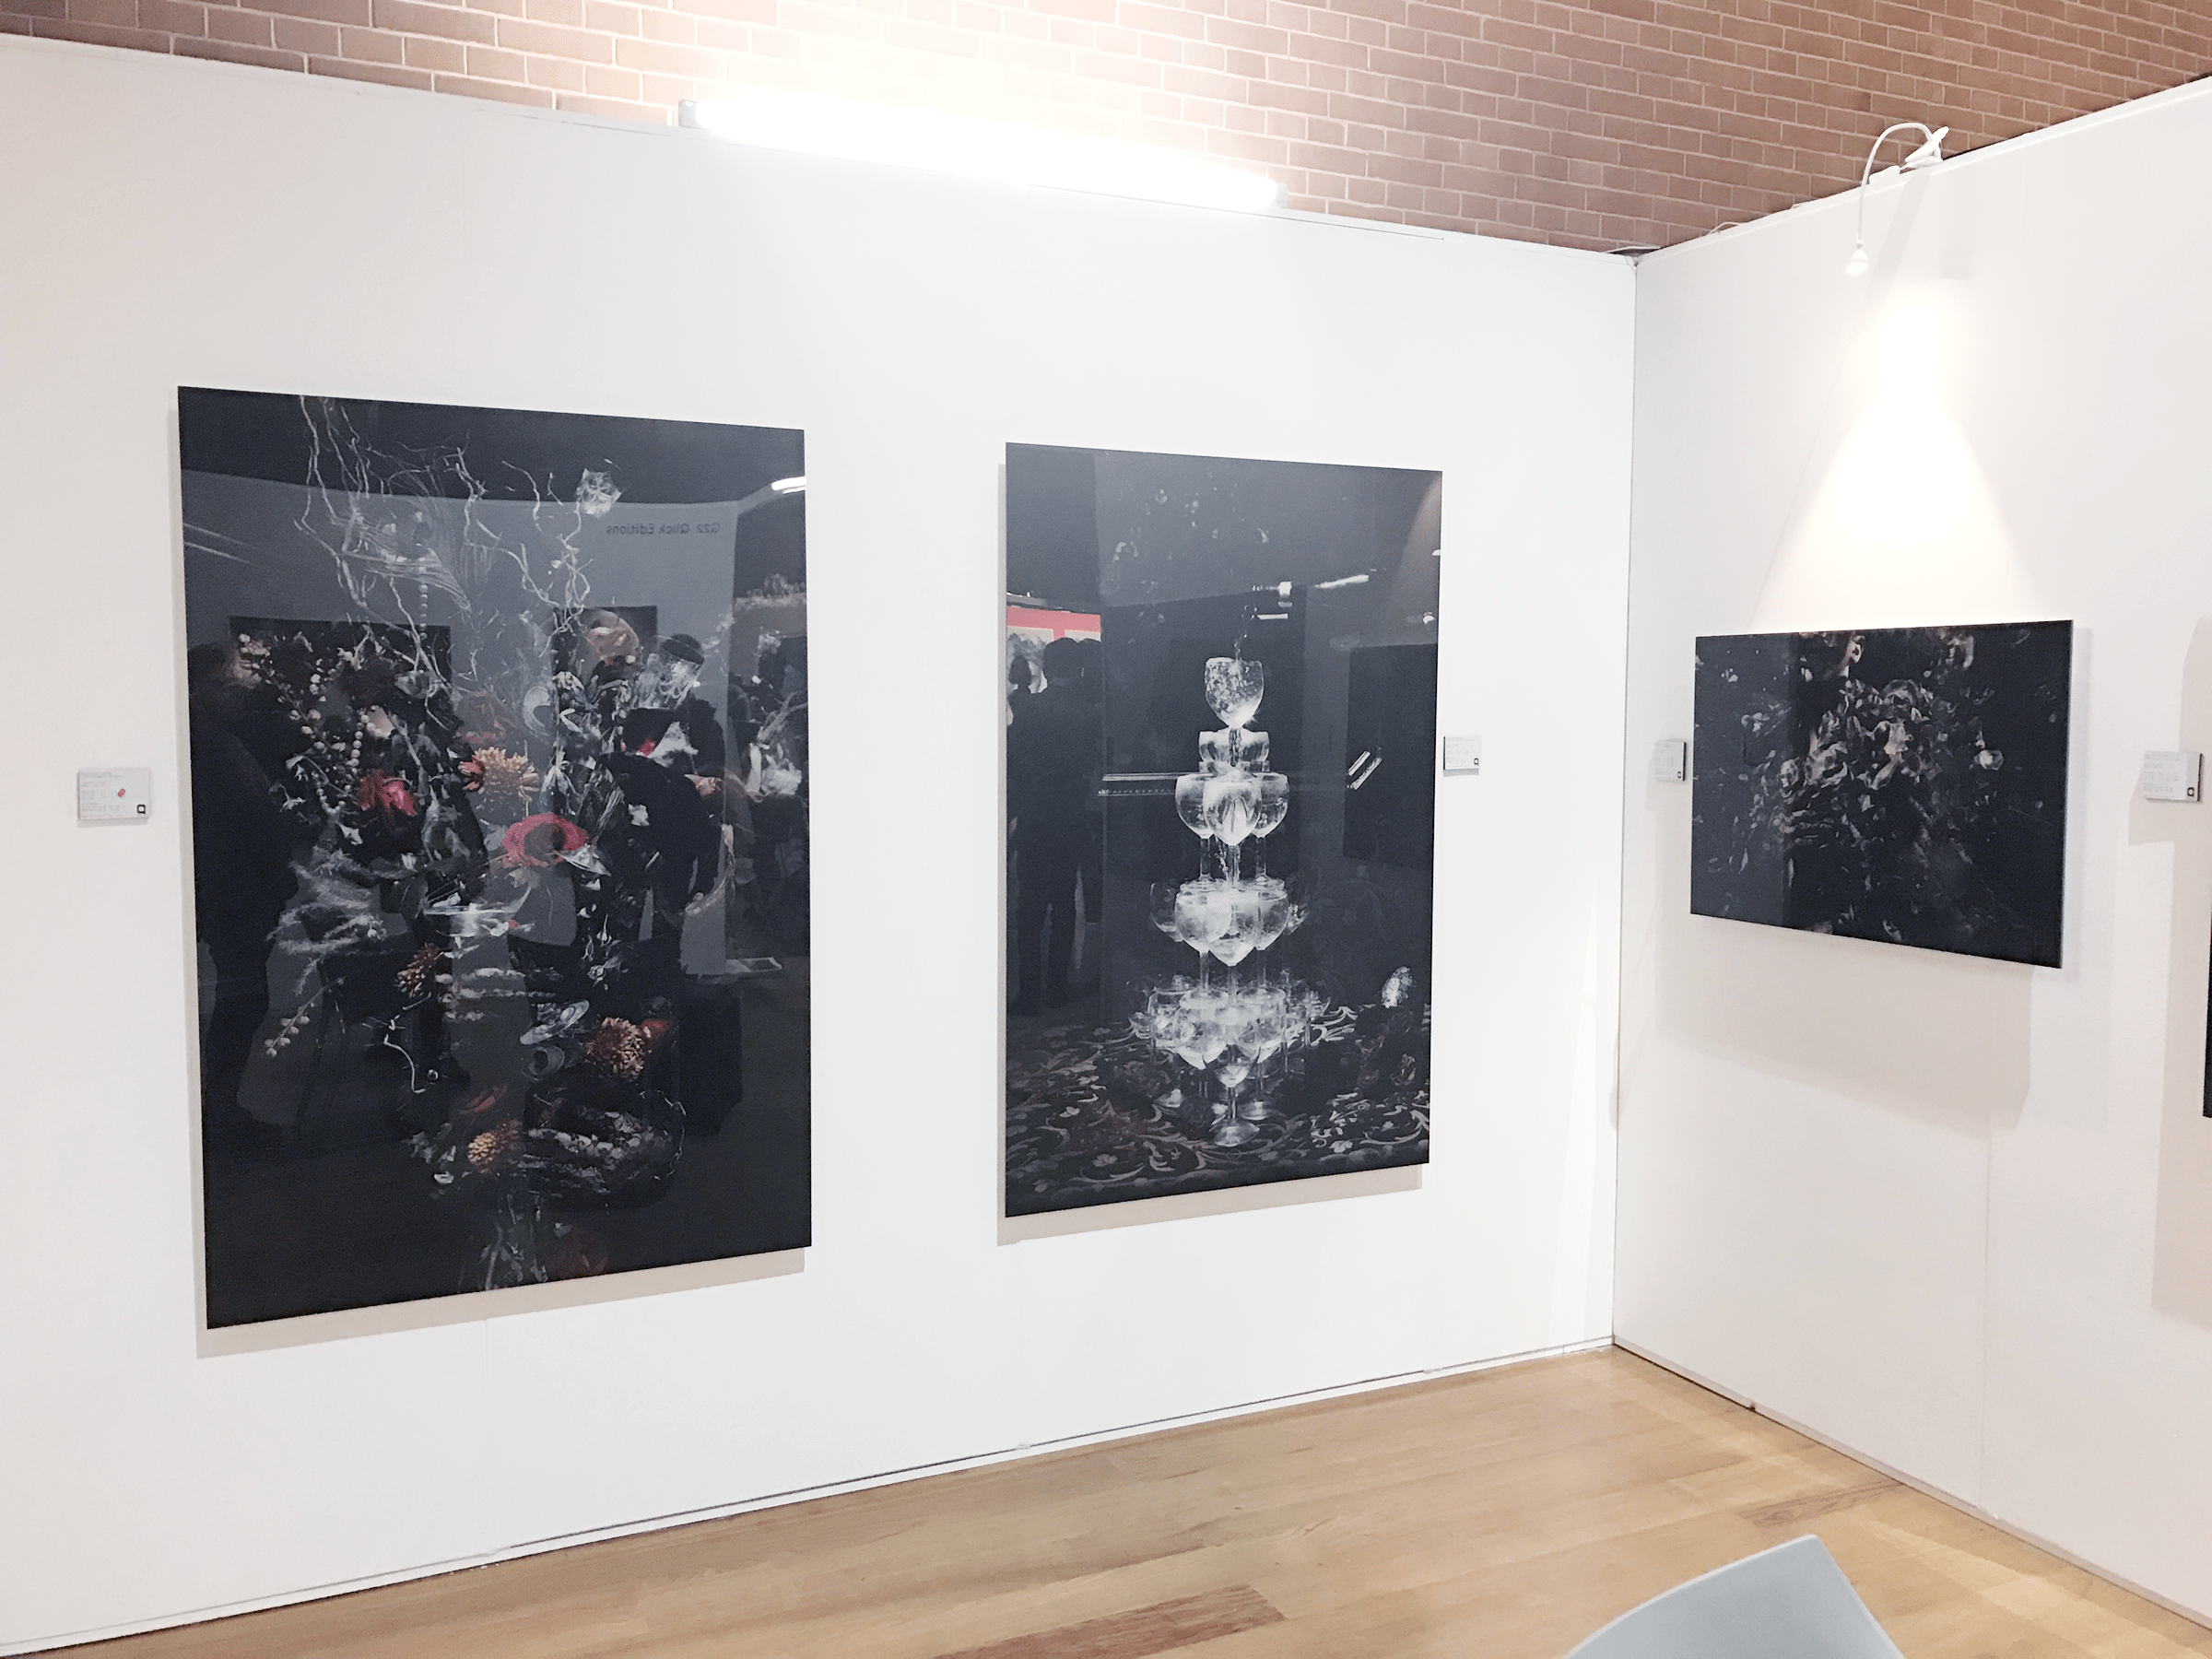 2016 Exhibition and Publications, Qlick Gallery, This Art Fair